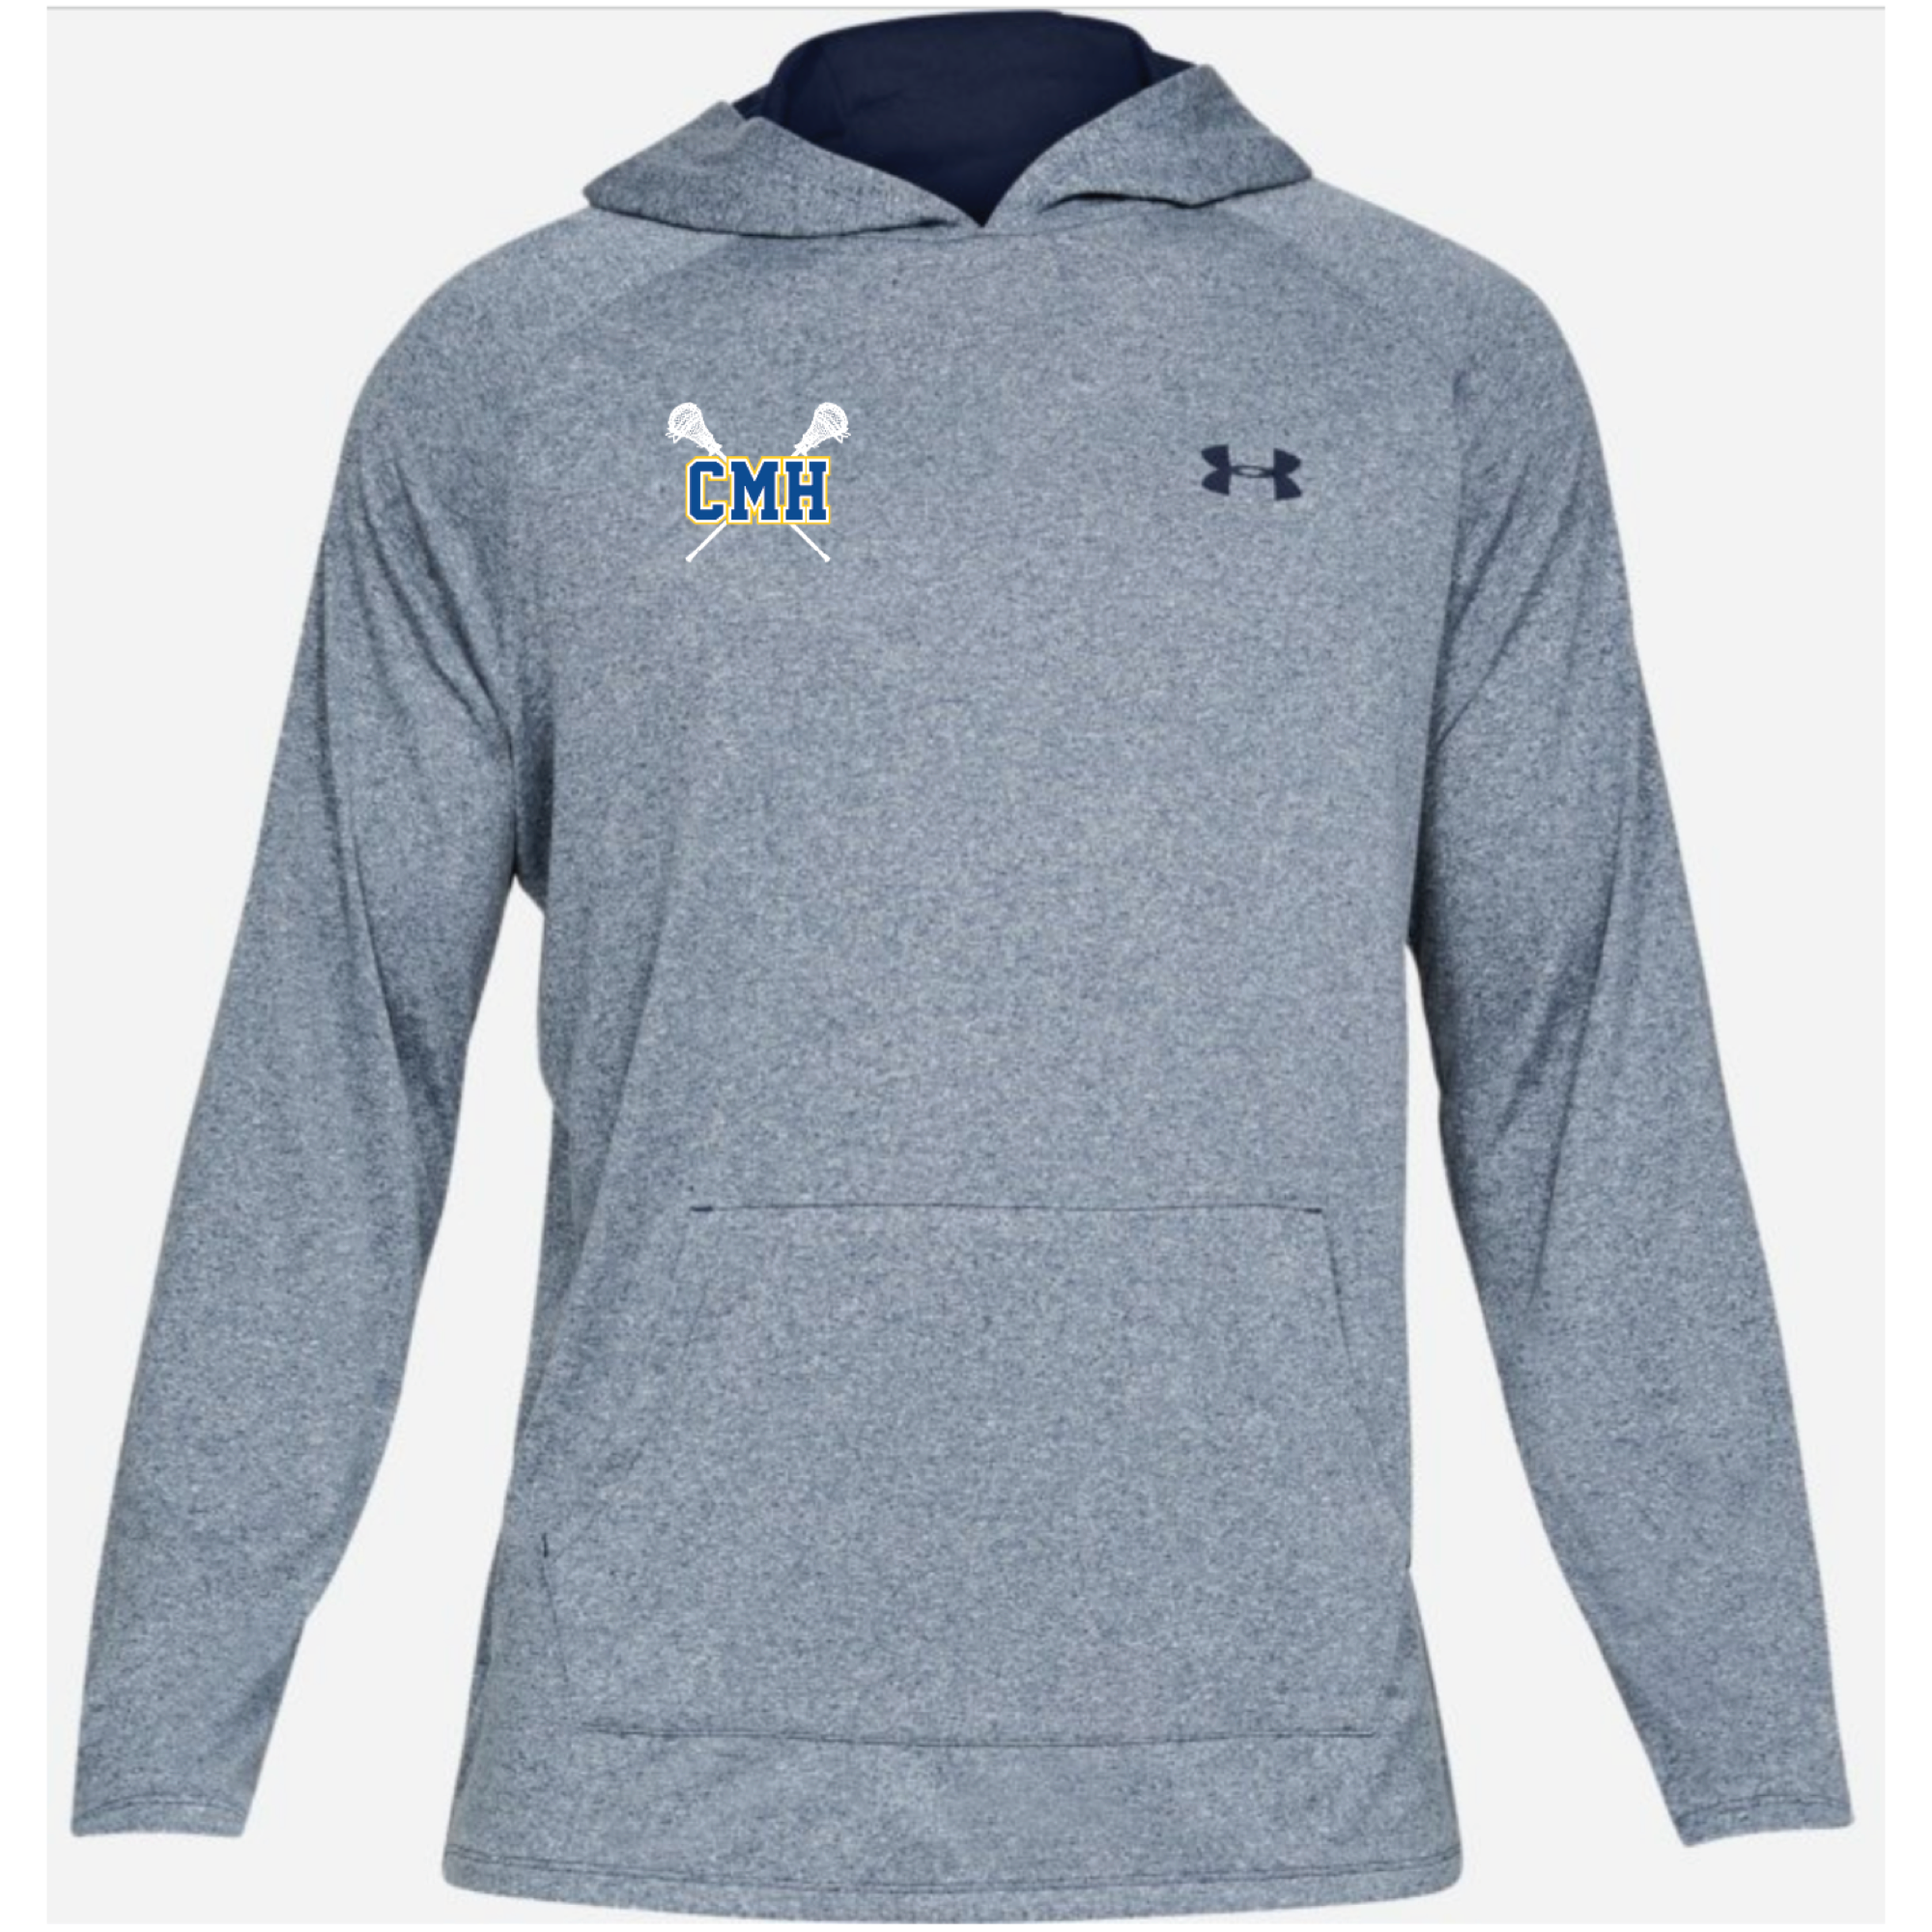 under armour tech 2.0 hoodie